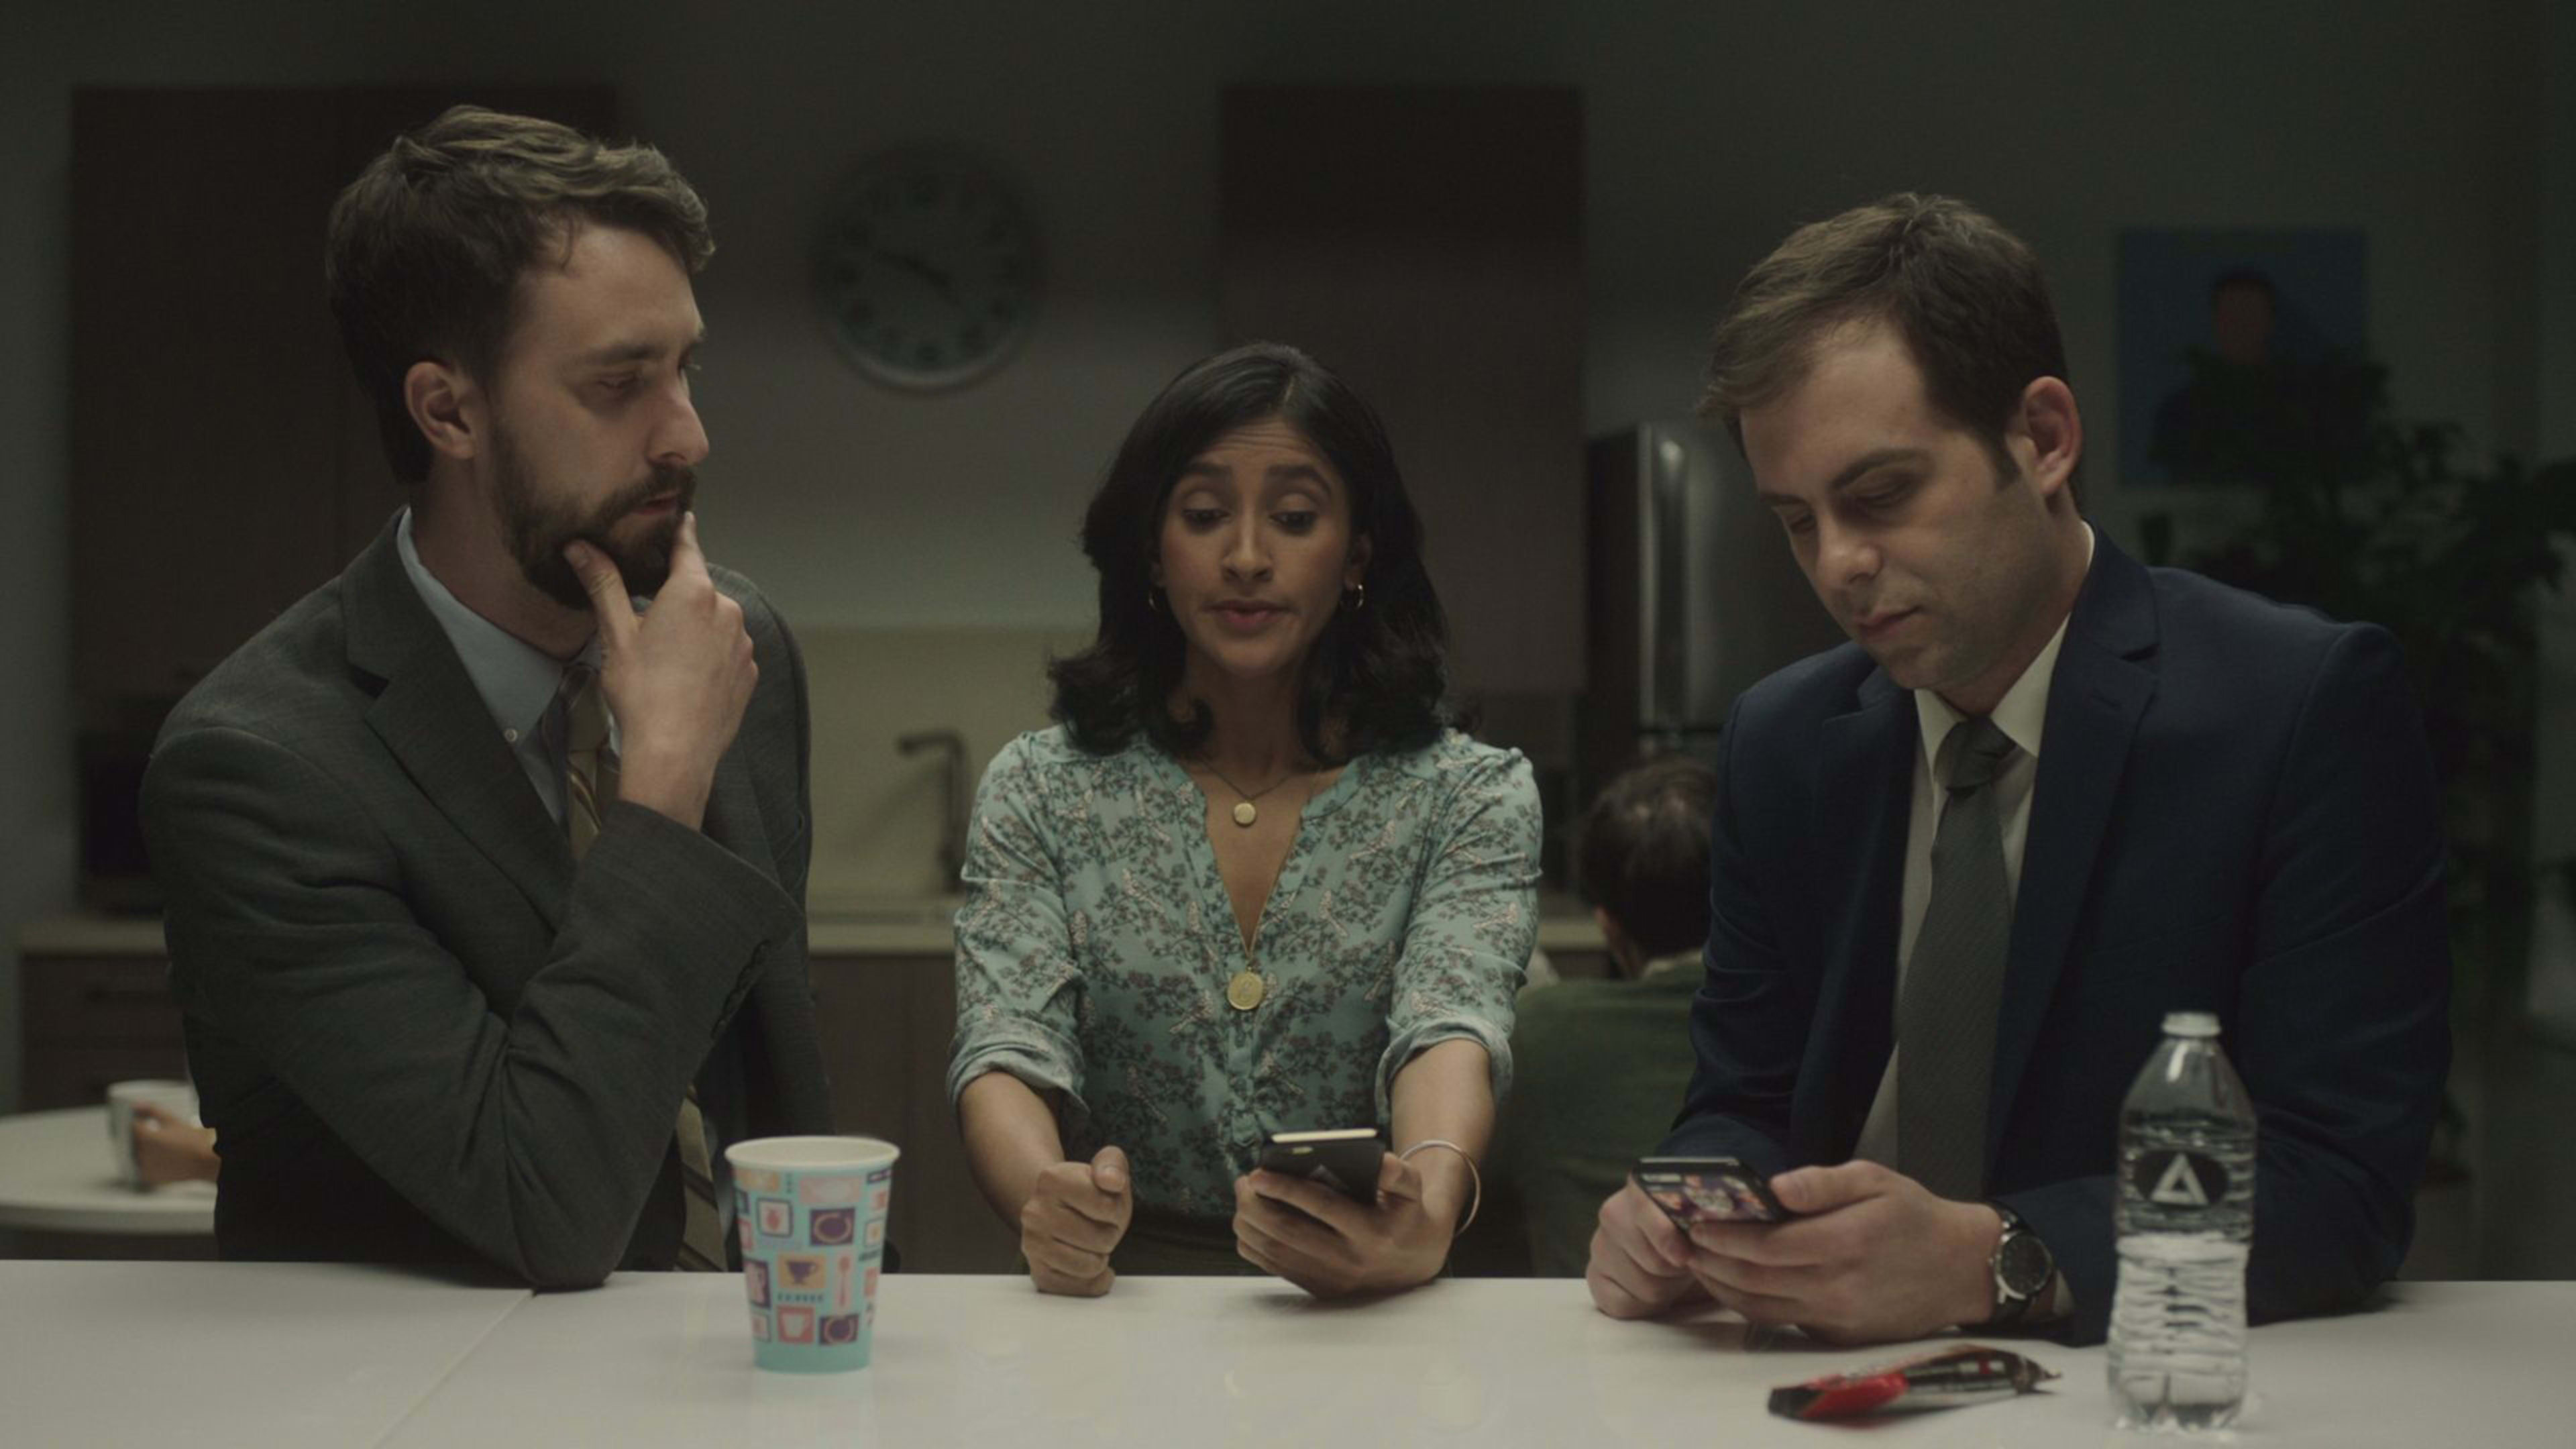 Season 2 of Comedy Central’s Corporate will make you hate your job just a little bit less